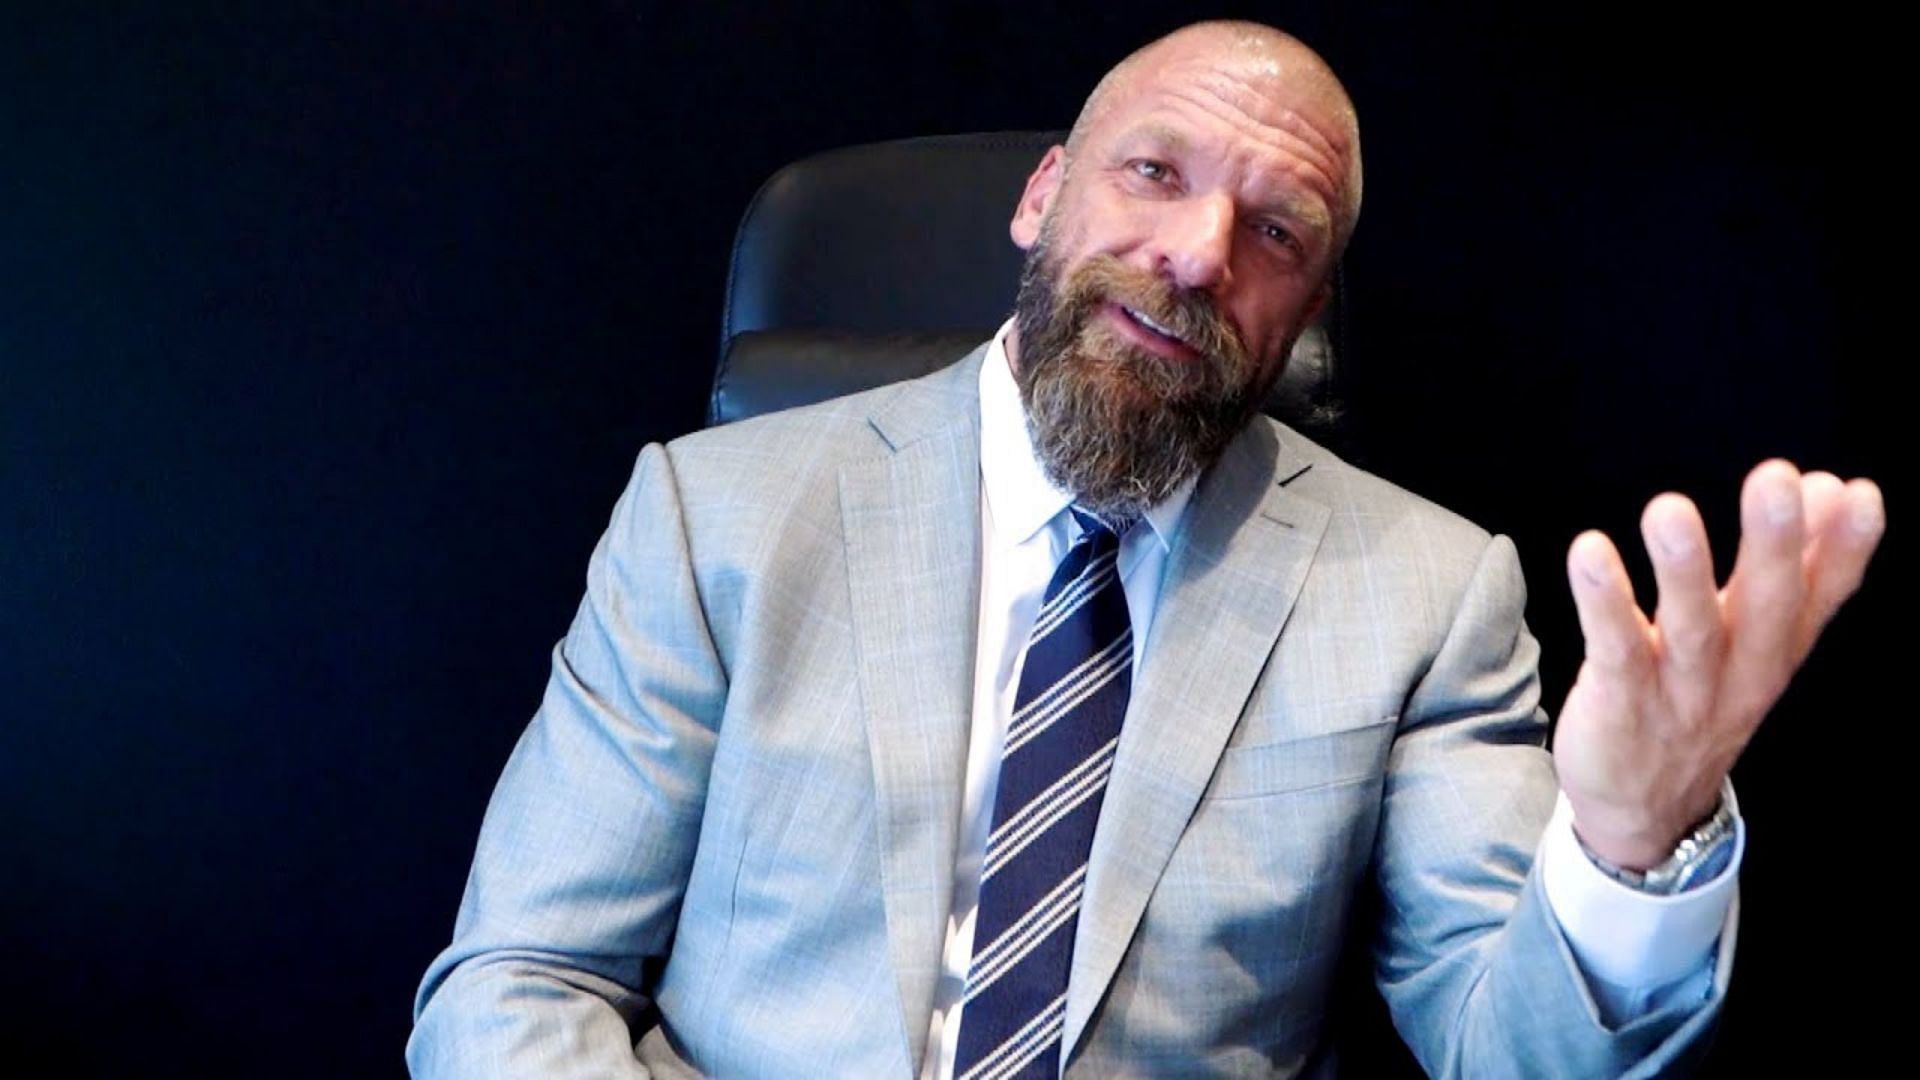 Triple H is the Chief Content Officer of WWE